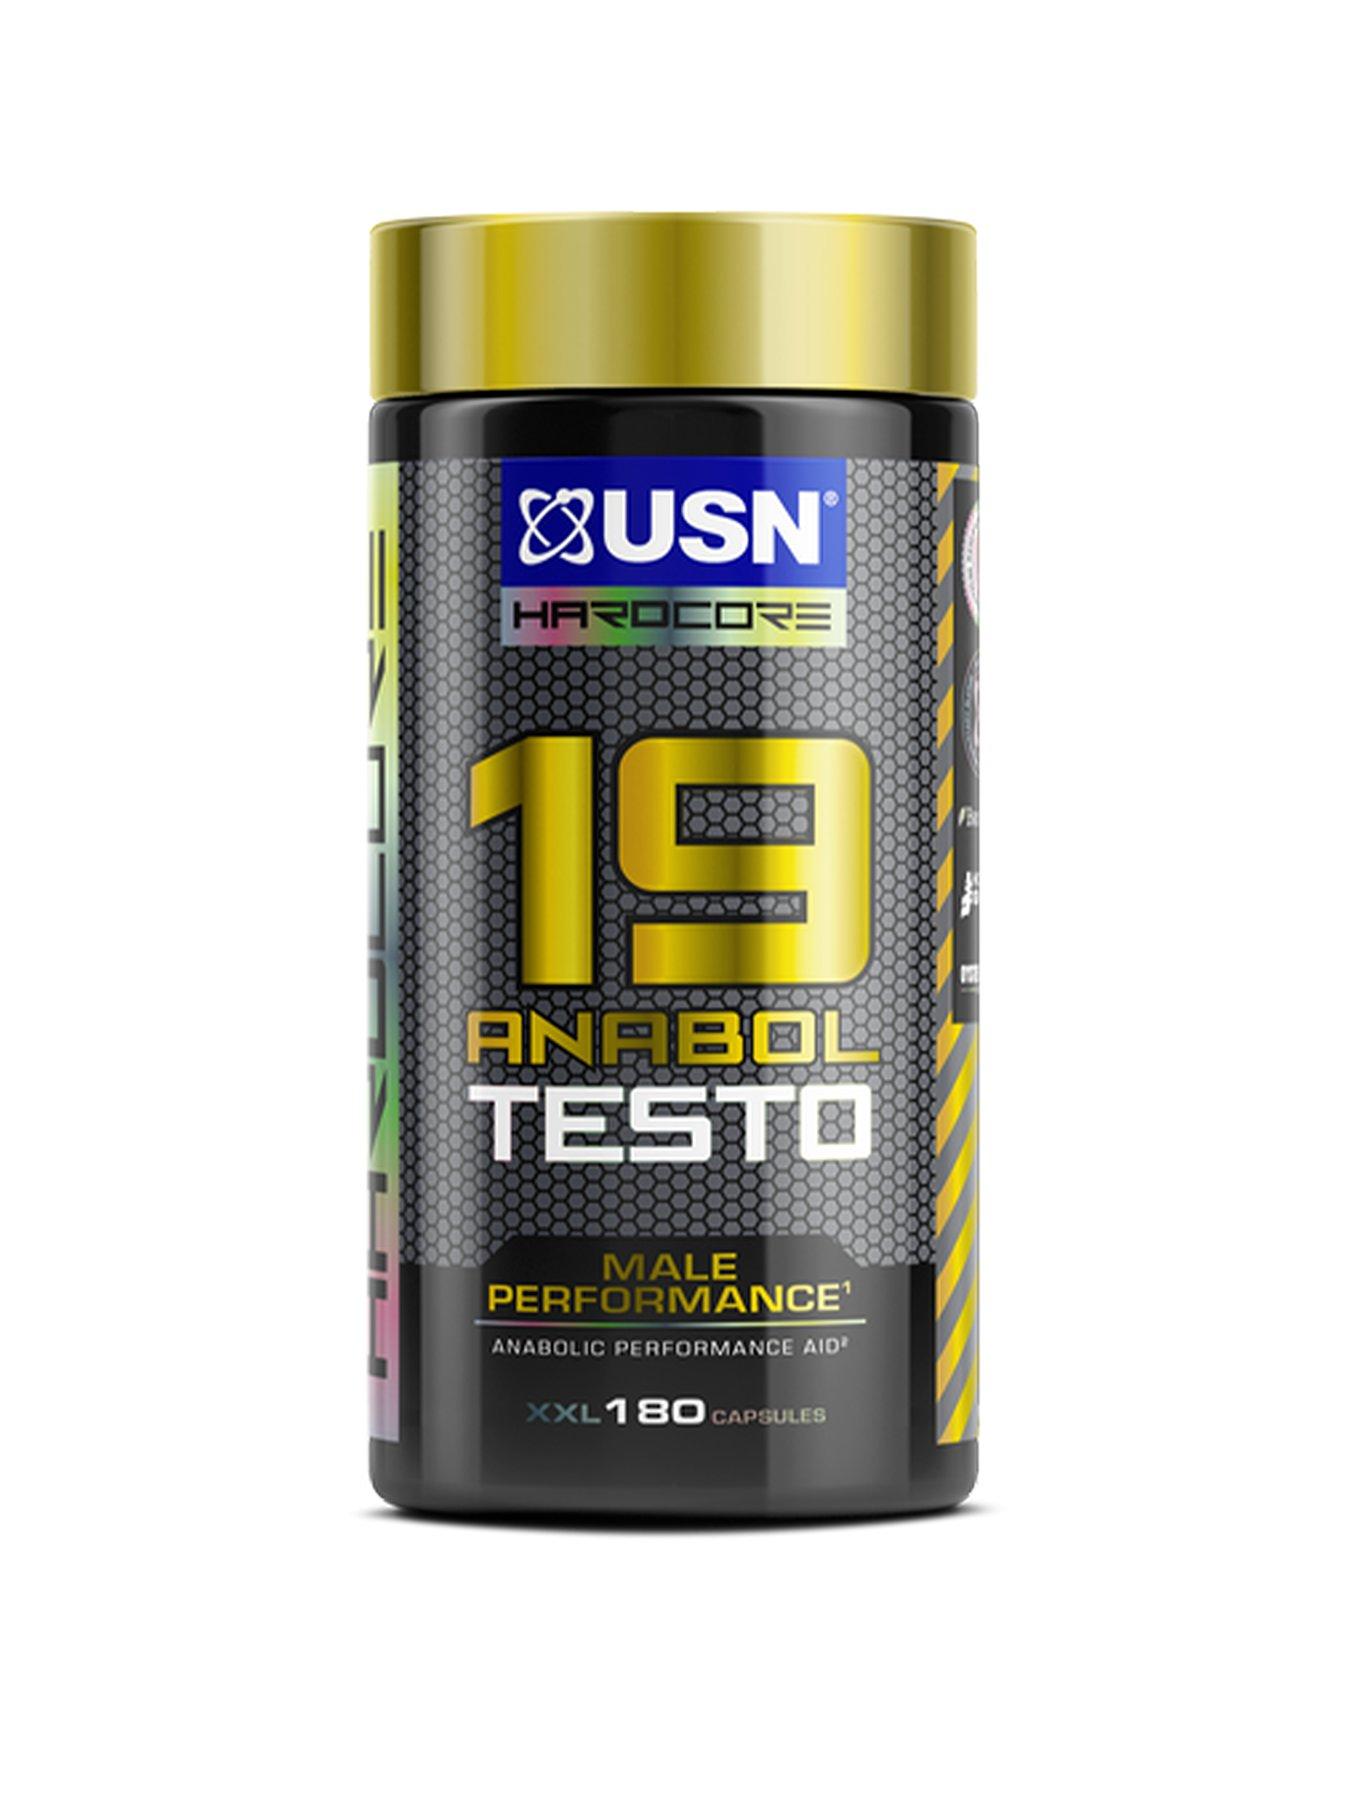 Usn muscle fuel anabolic customer review